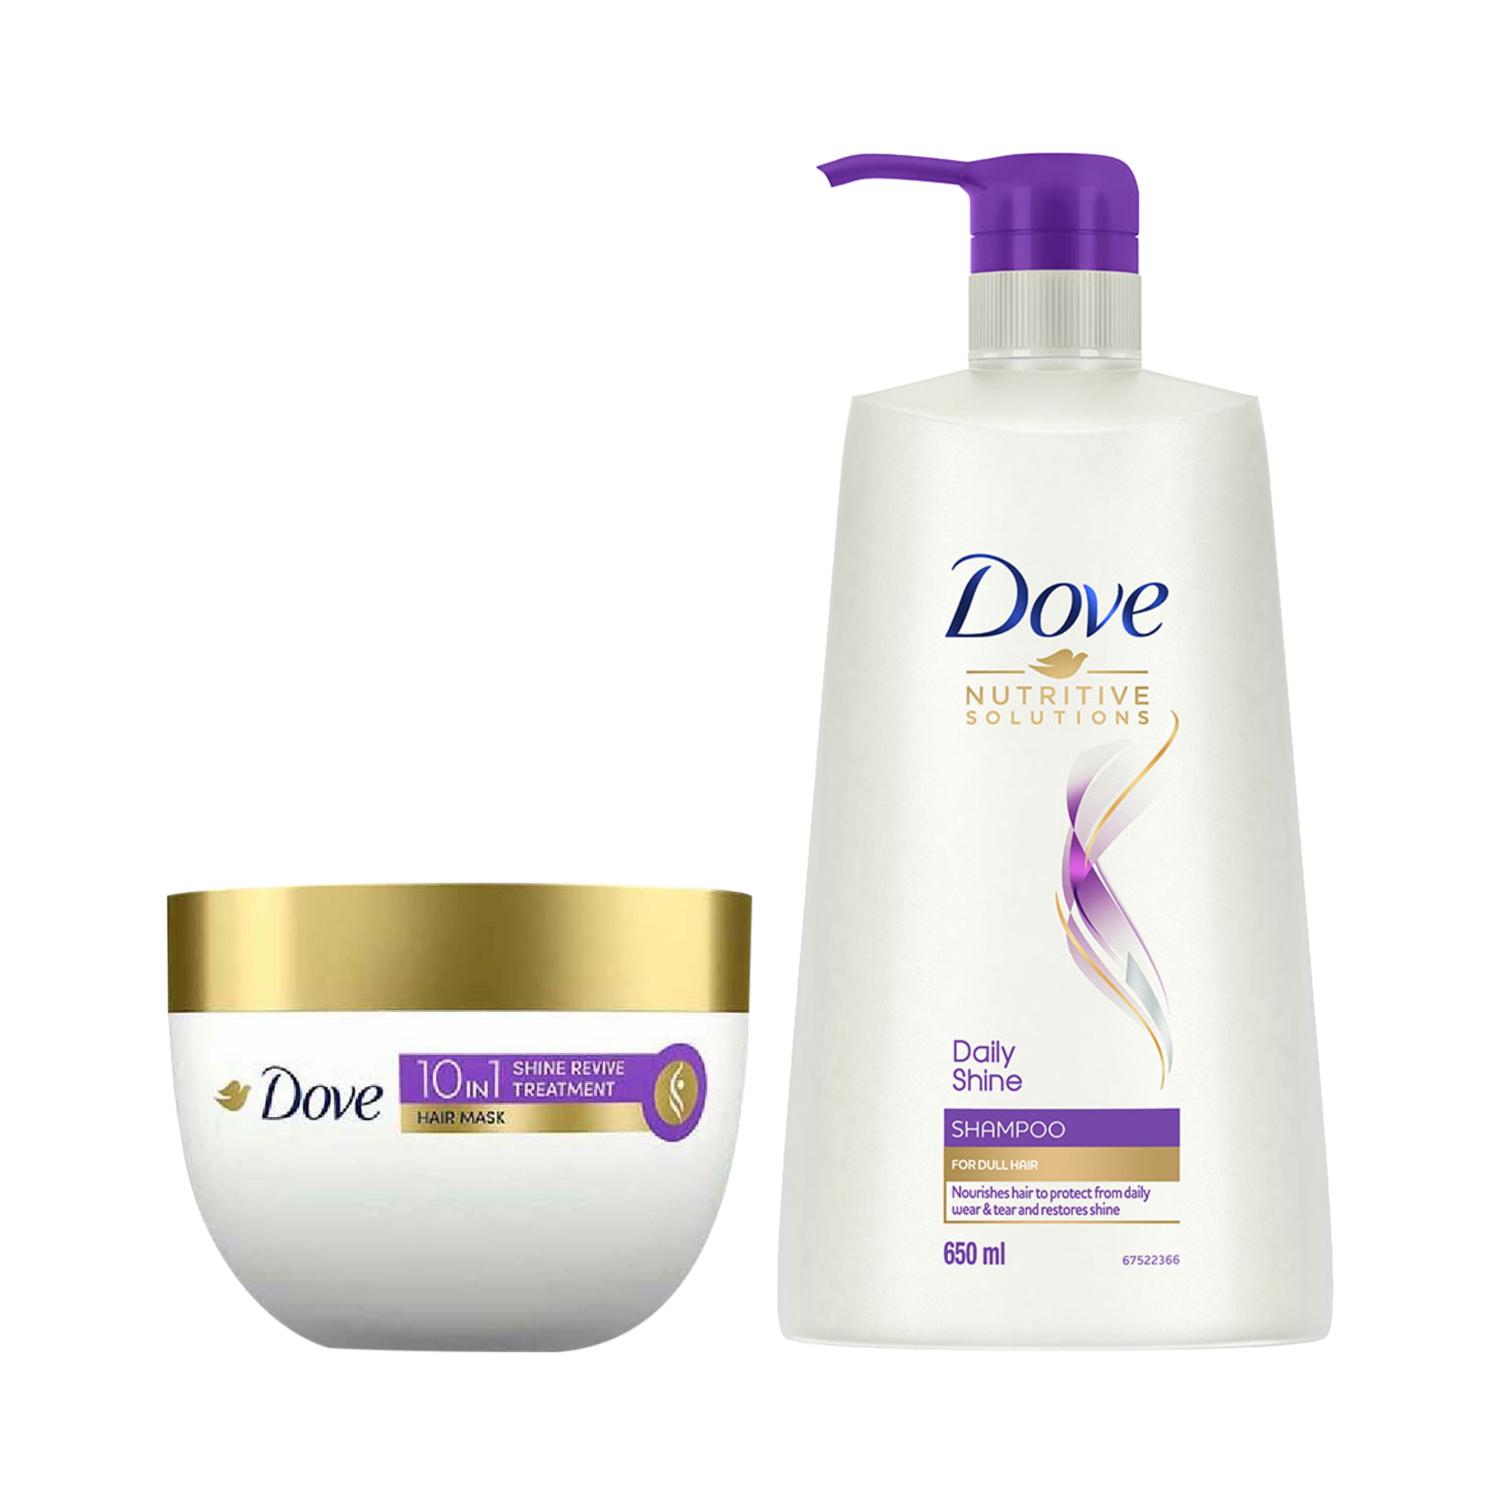 Dove | Dove Daily Shine Shampoo for Dull Hair + 10 in 1 Shine Revive Treatment Hair Mask Combo